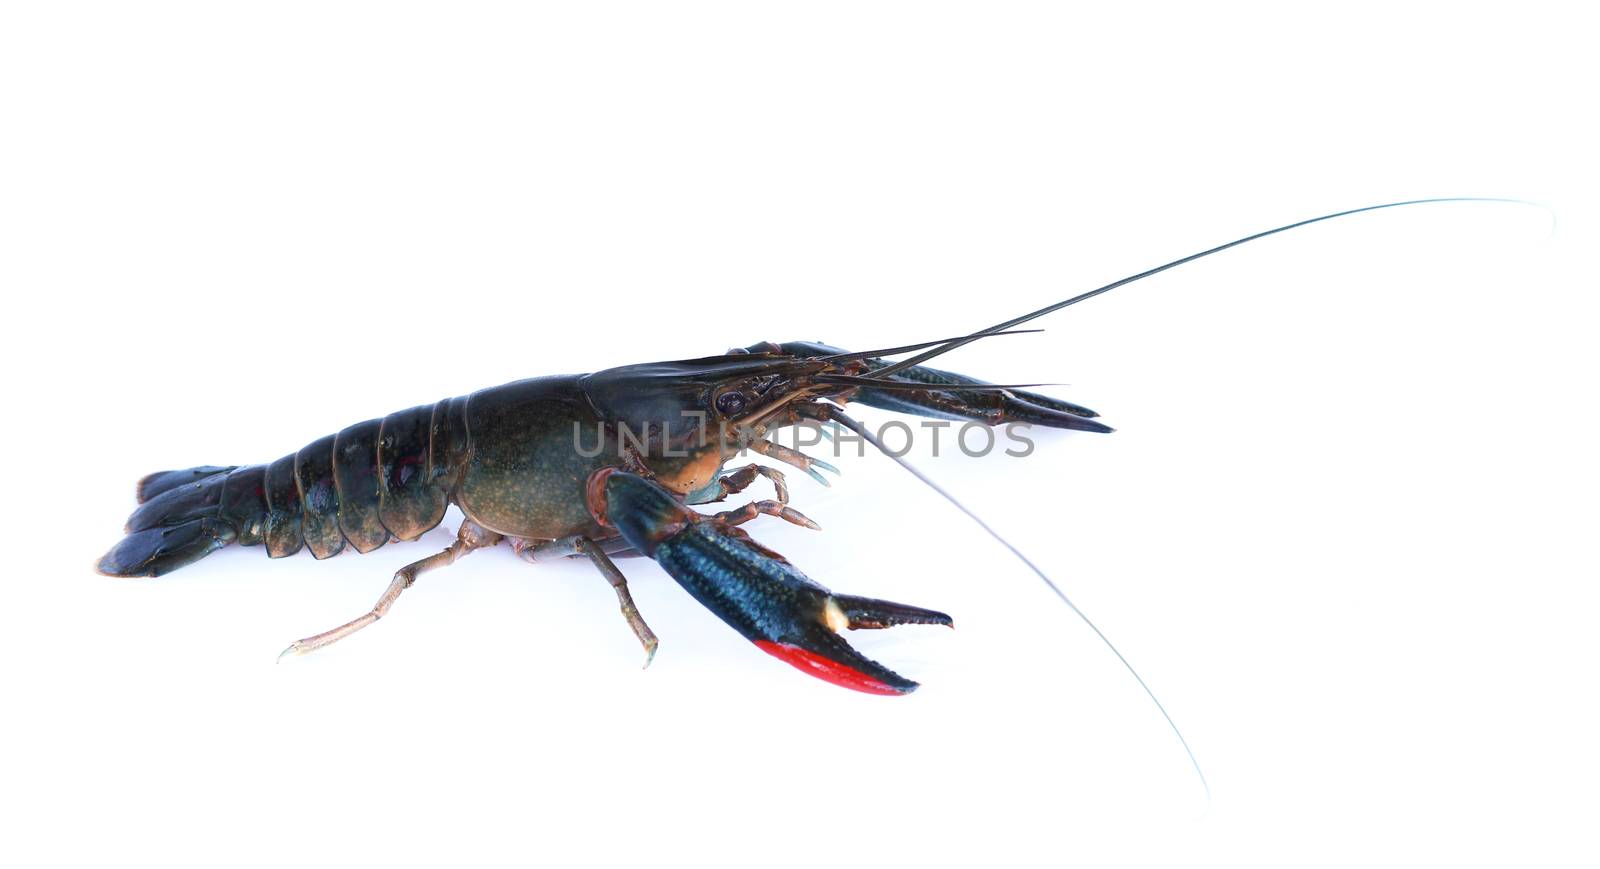 Image of lobster isolated on white background.